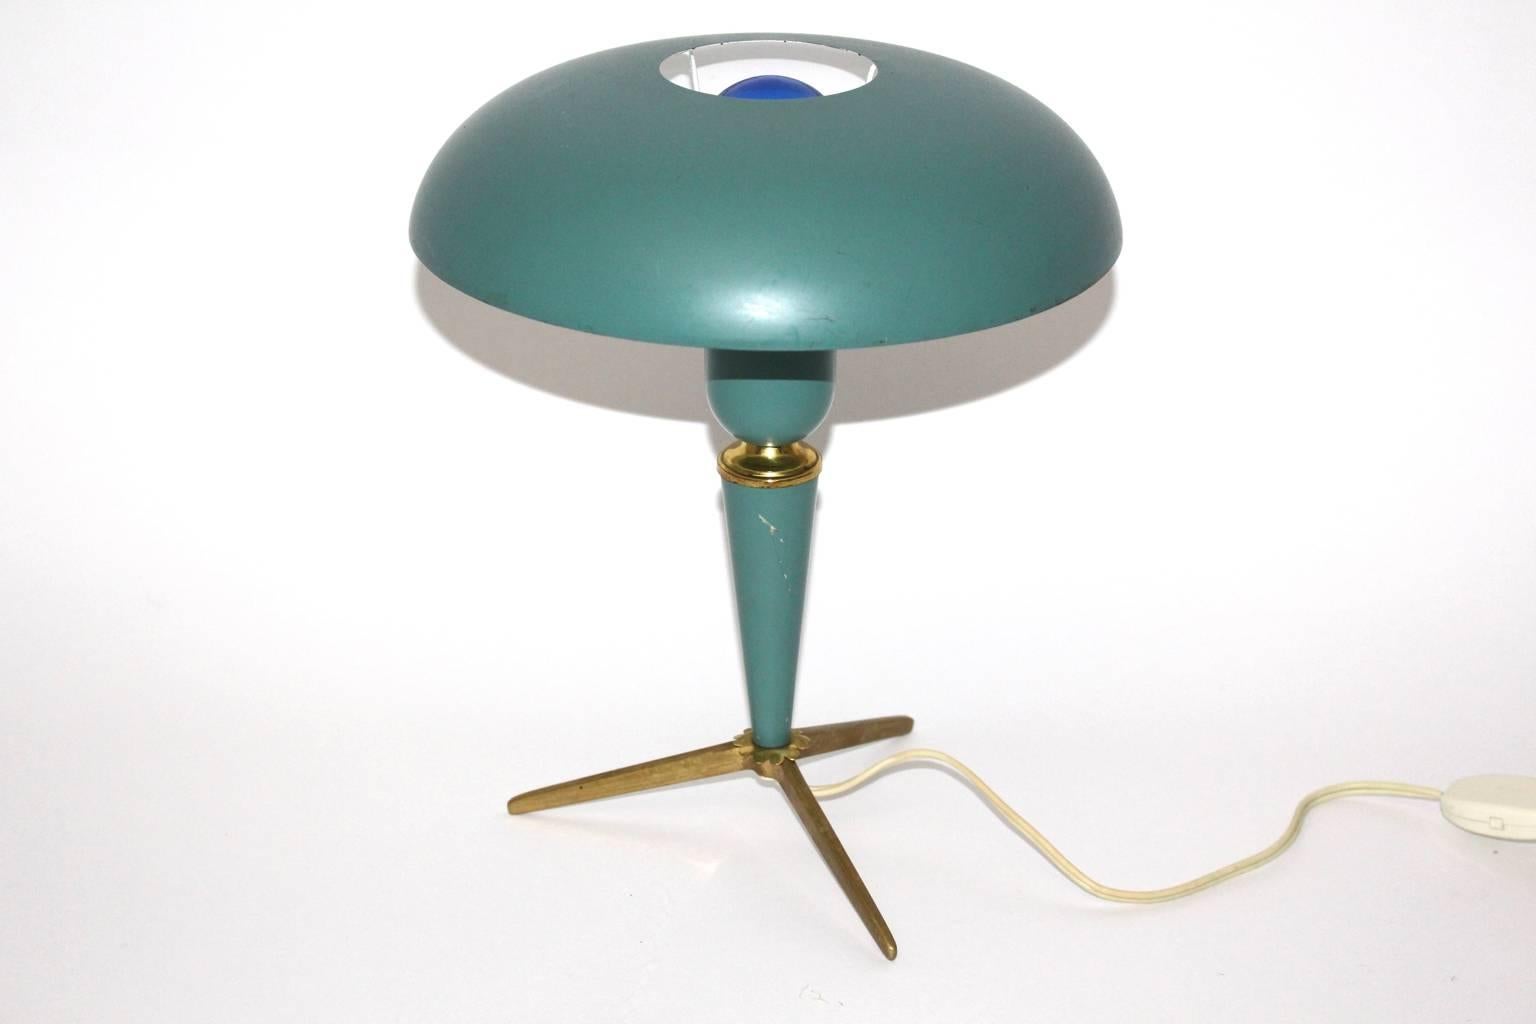 A blue - green trilegged mid century modern vintage table lamp, which was designed by Louis Kalff, 1958 for Philips, Netherlands. (Paper label inside).
This model was designed for the world exhibition in Bruxelles, Belgium, 1958.
The vintage